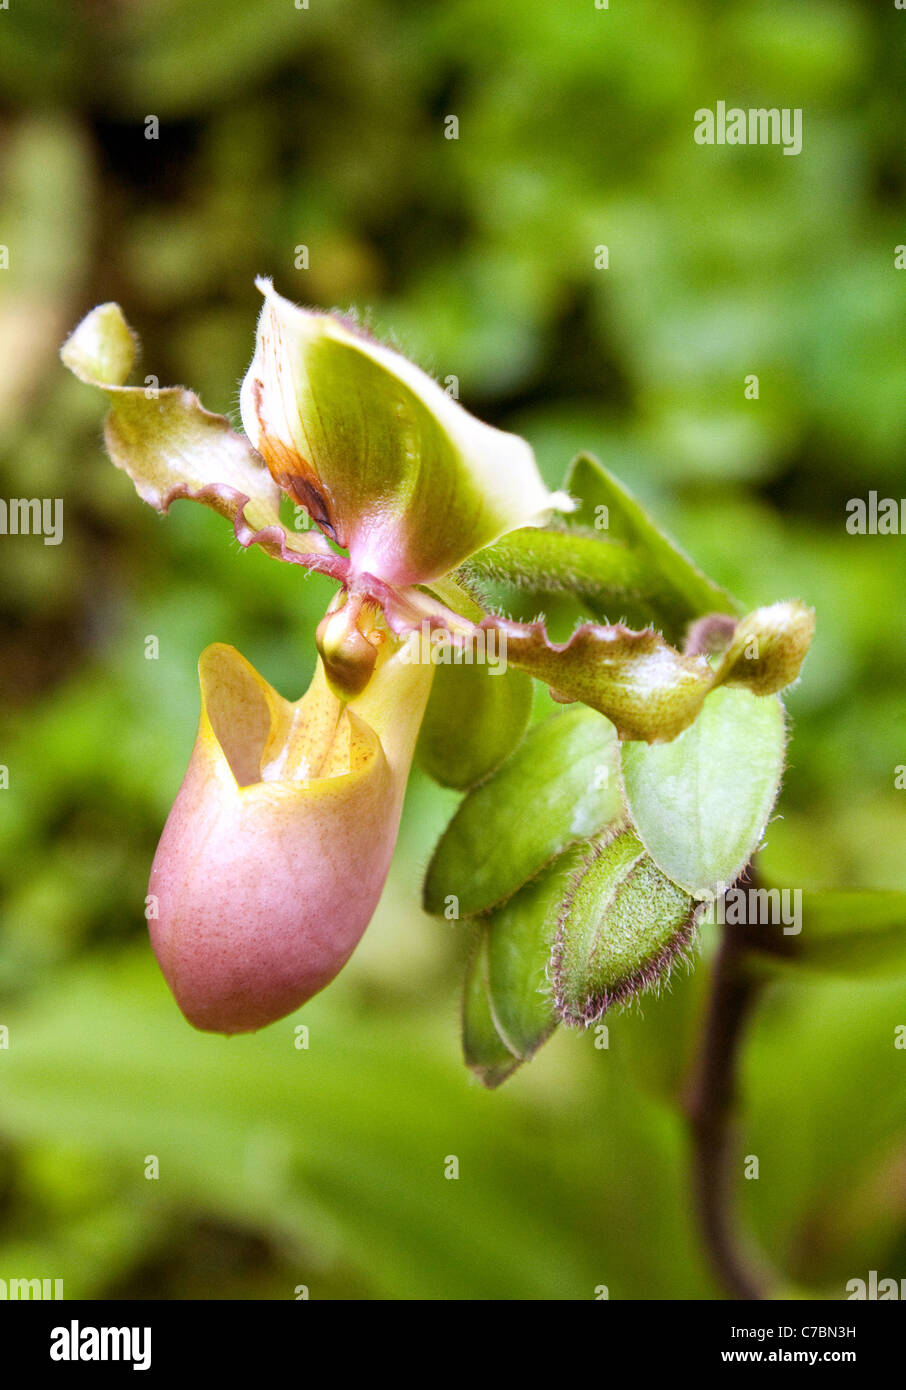 Pitcher plant, an insect eating plant, Asia Stock Photo